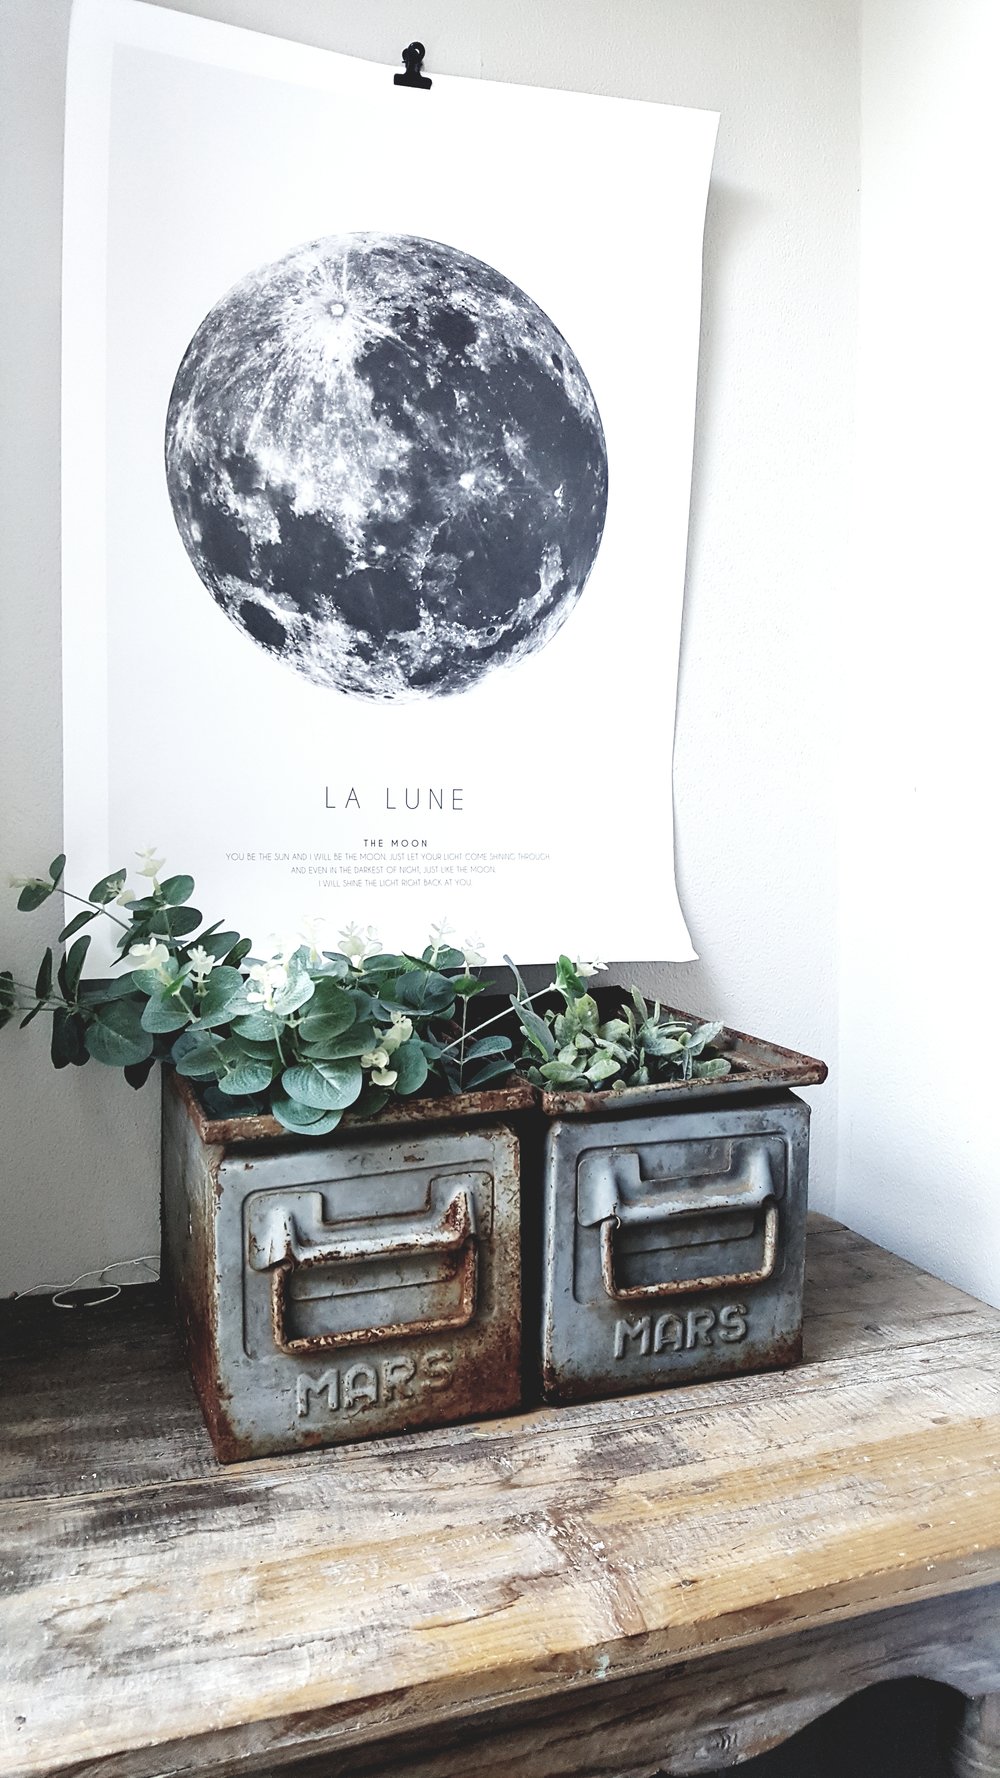  The La Lune print is a recent purchase from  Desenio  